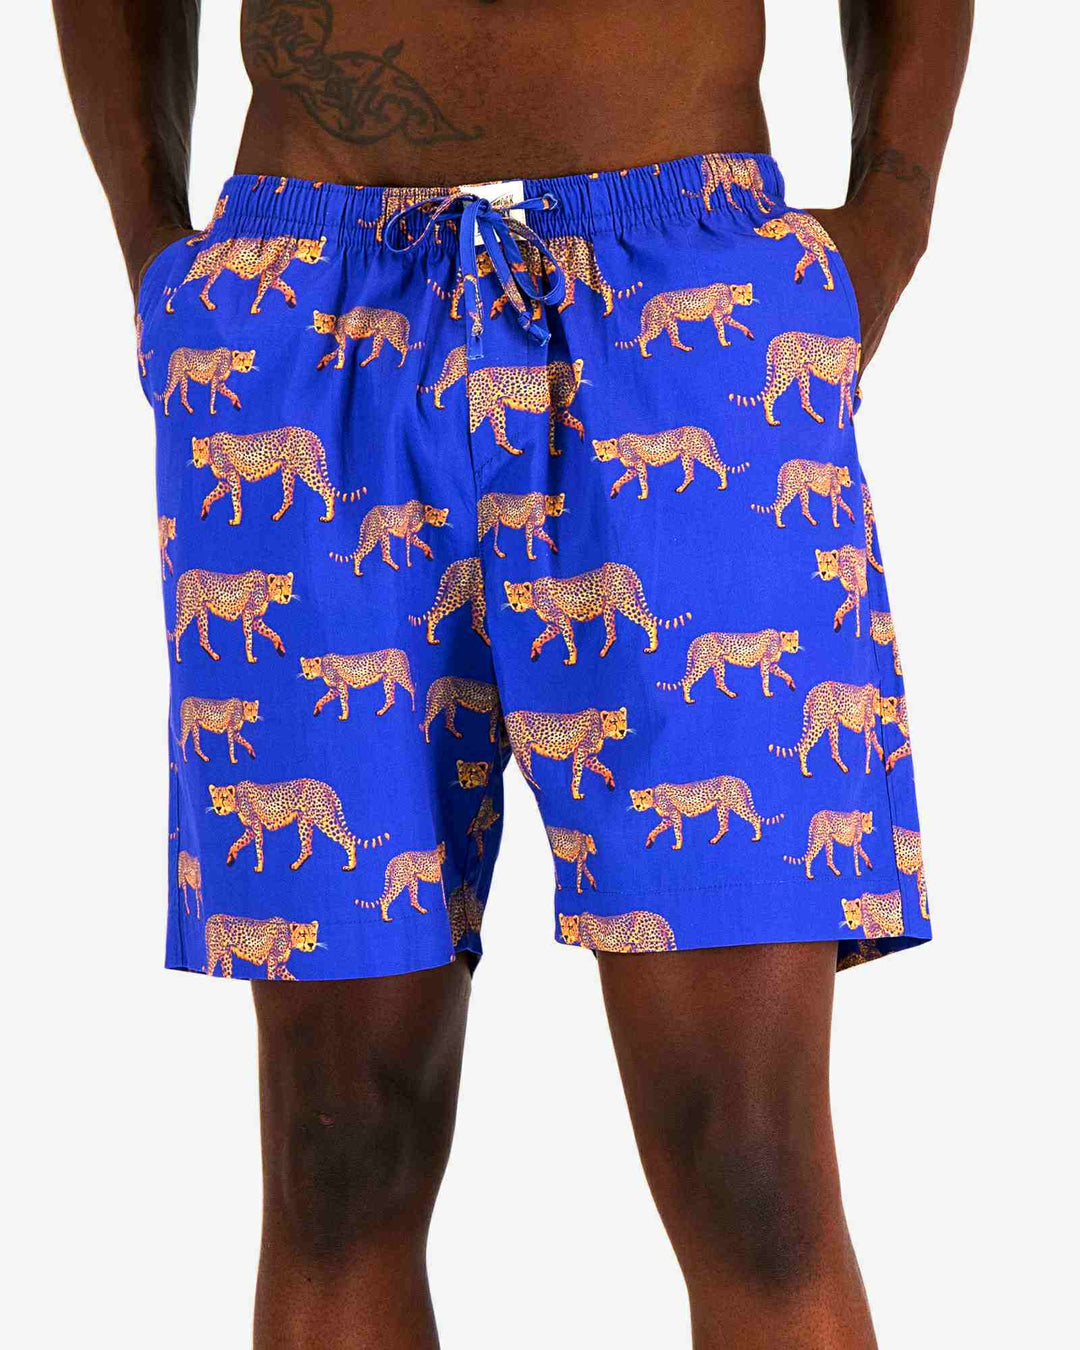 Mens lounge shorts with cheetahs on an electric blue background